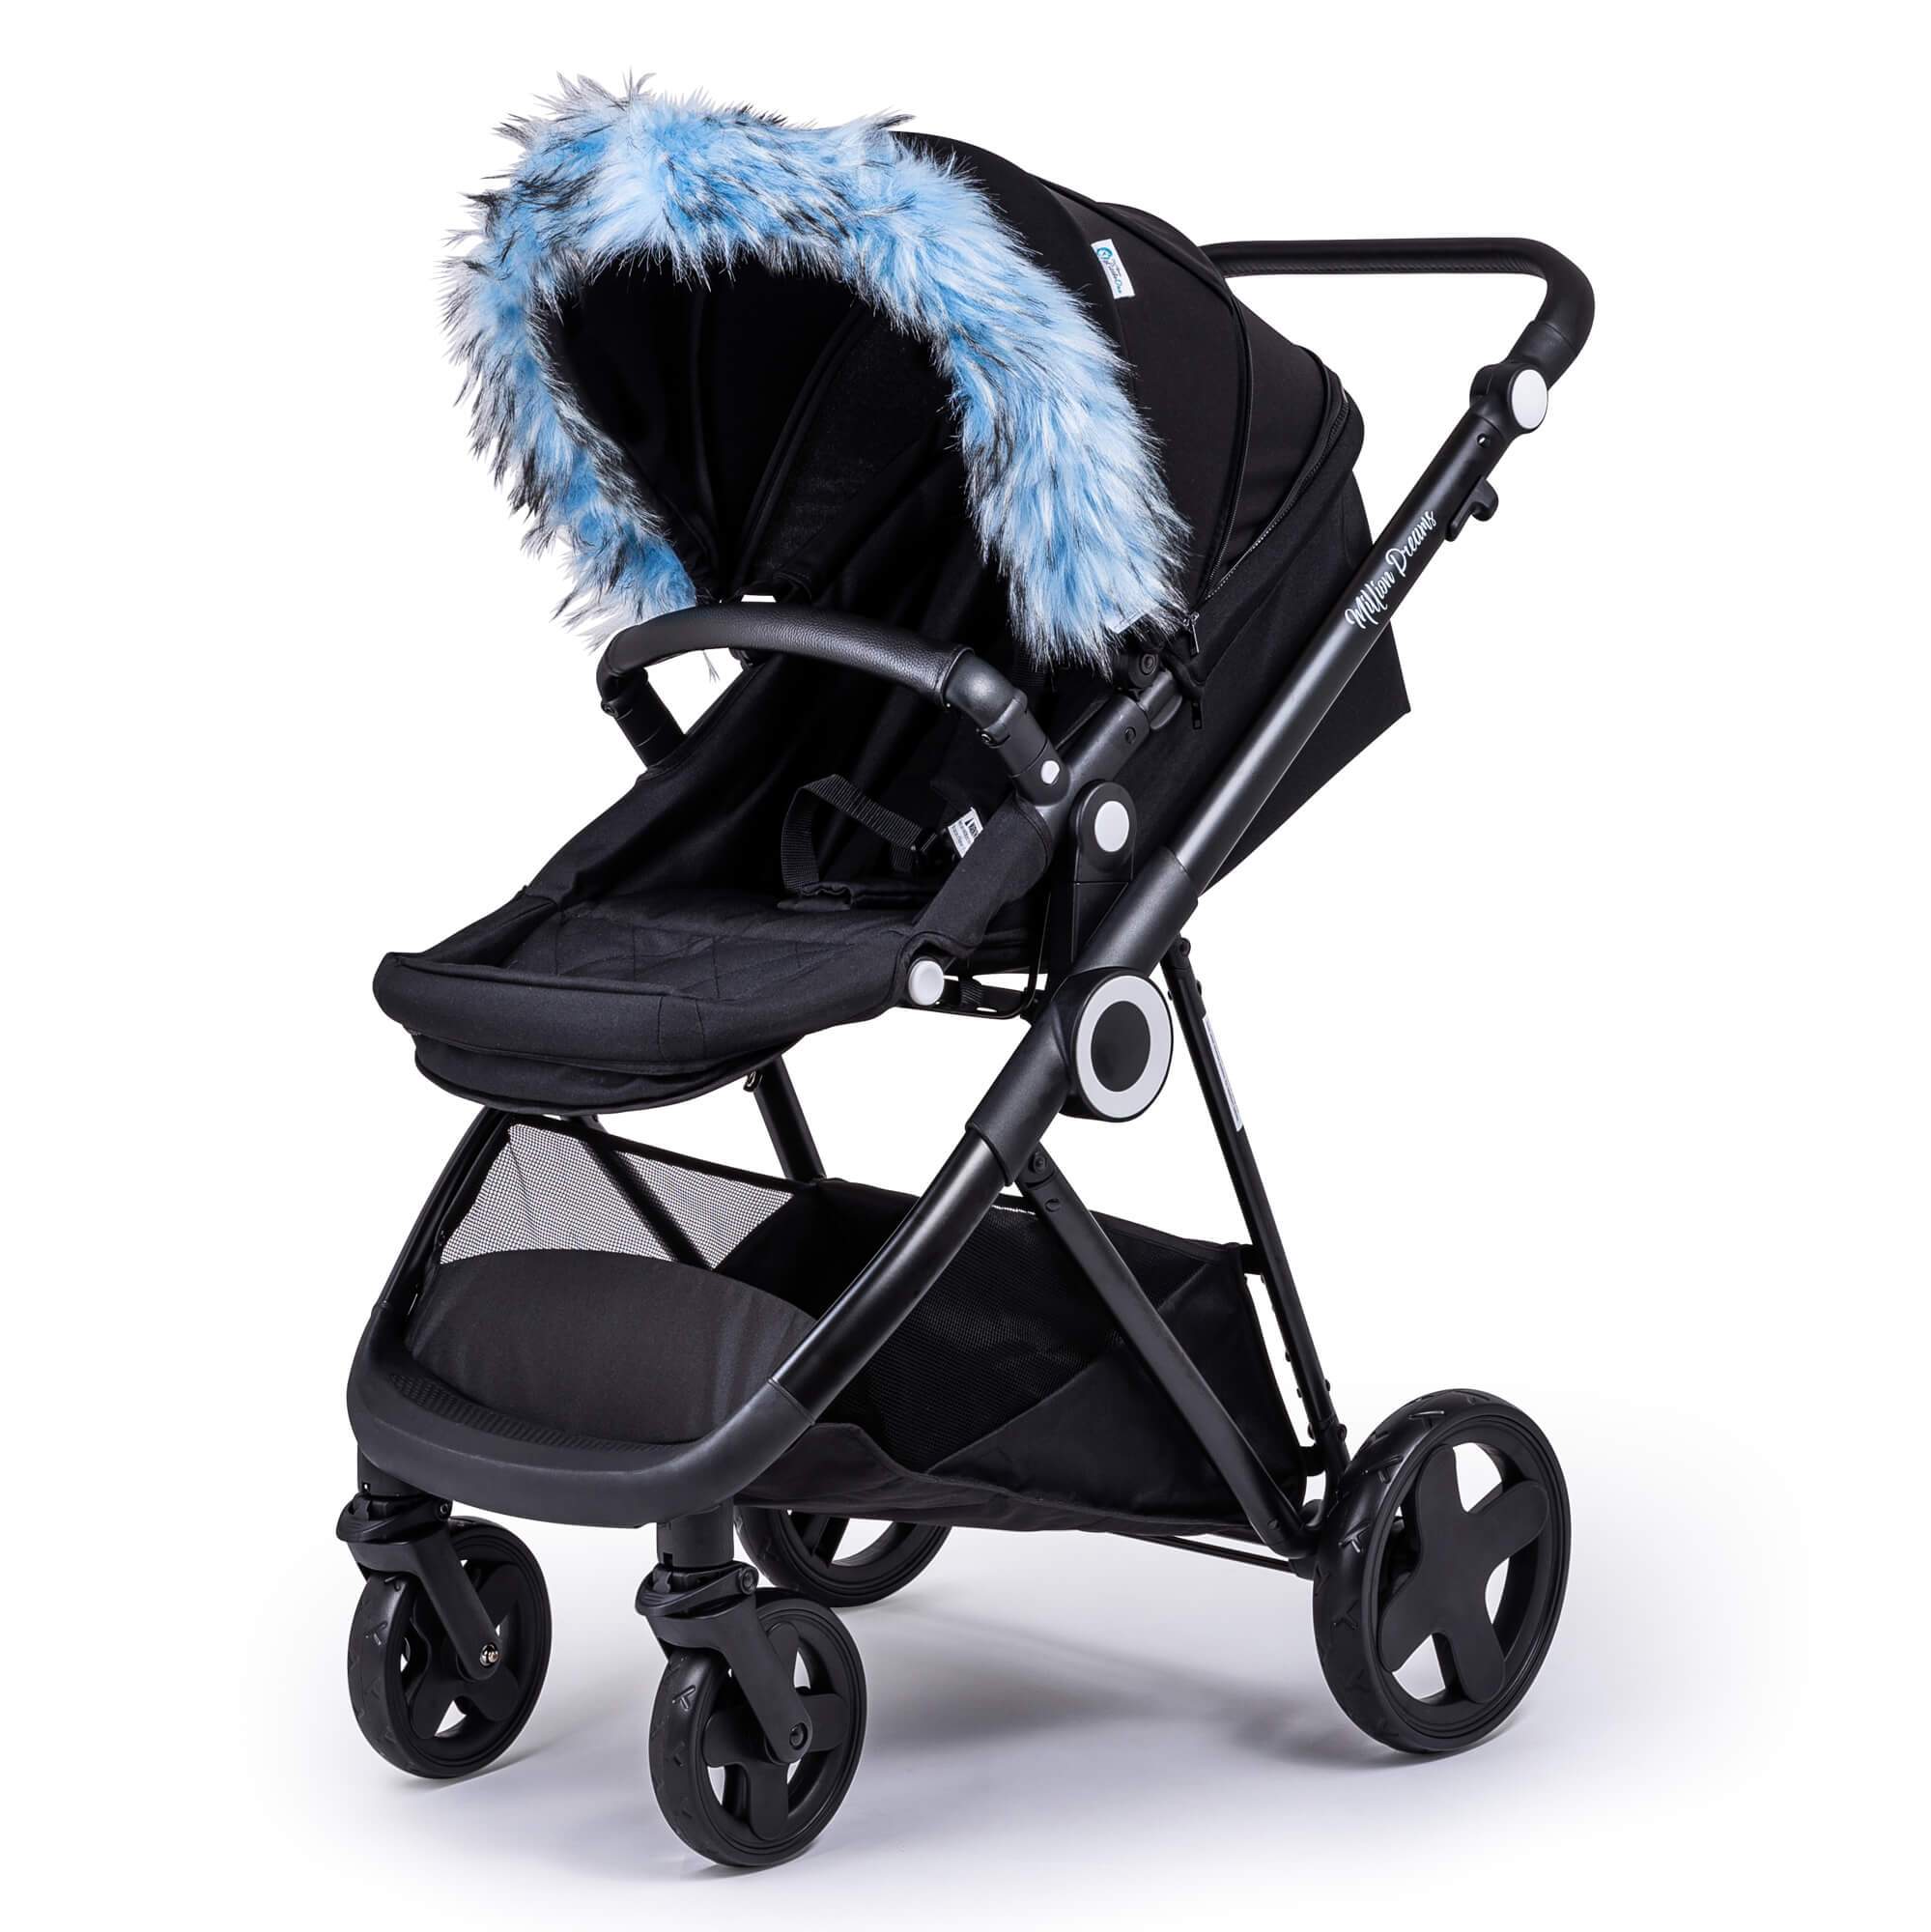 Pram Fur Hood Trim Attachment for Pushchair Compatible with iCandy - Light Blue / Fits All Models | For Your Little One